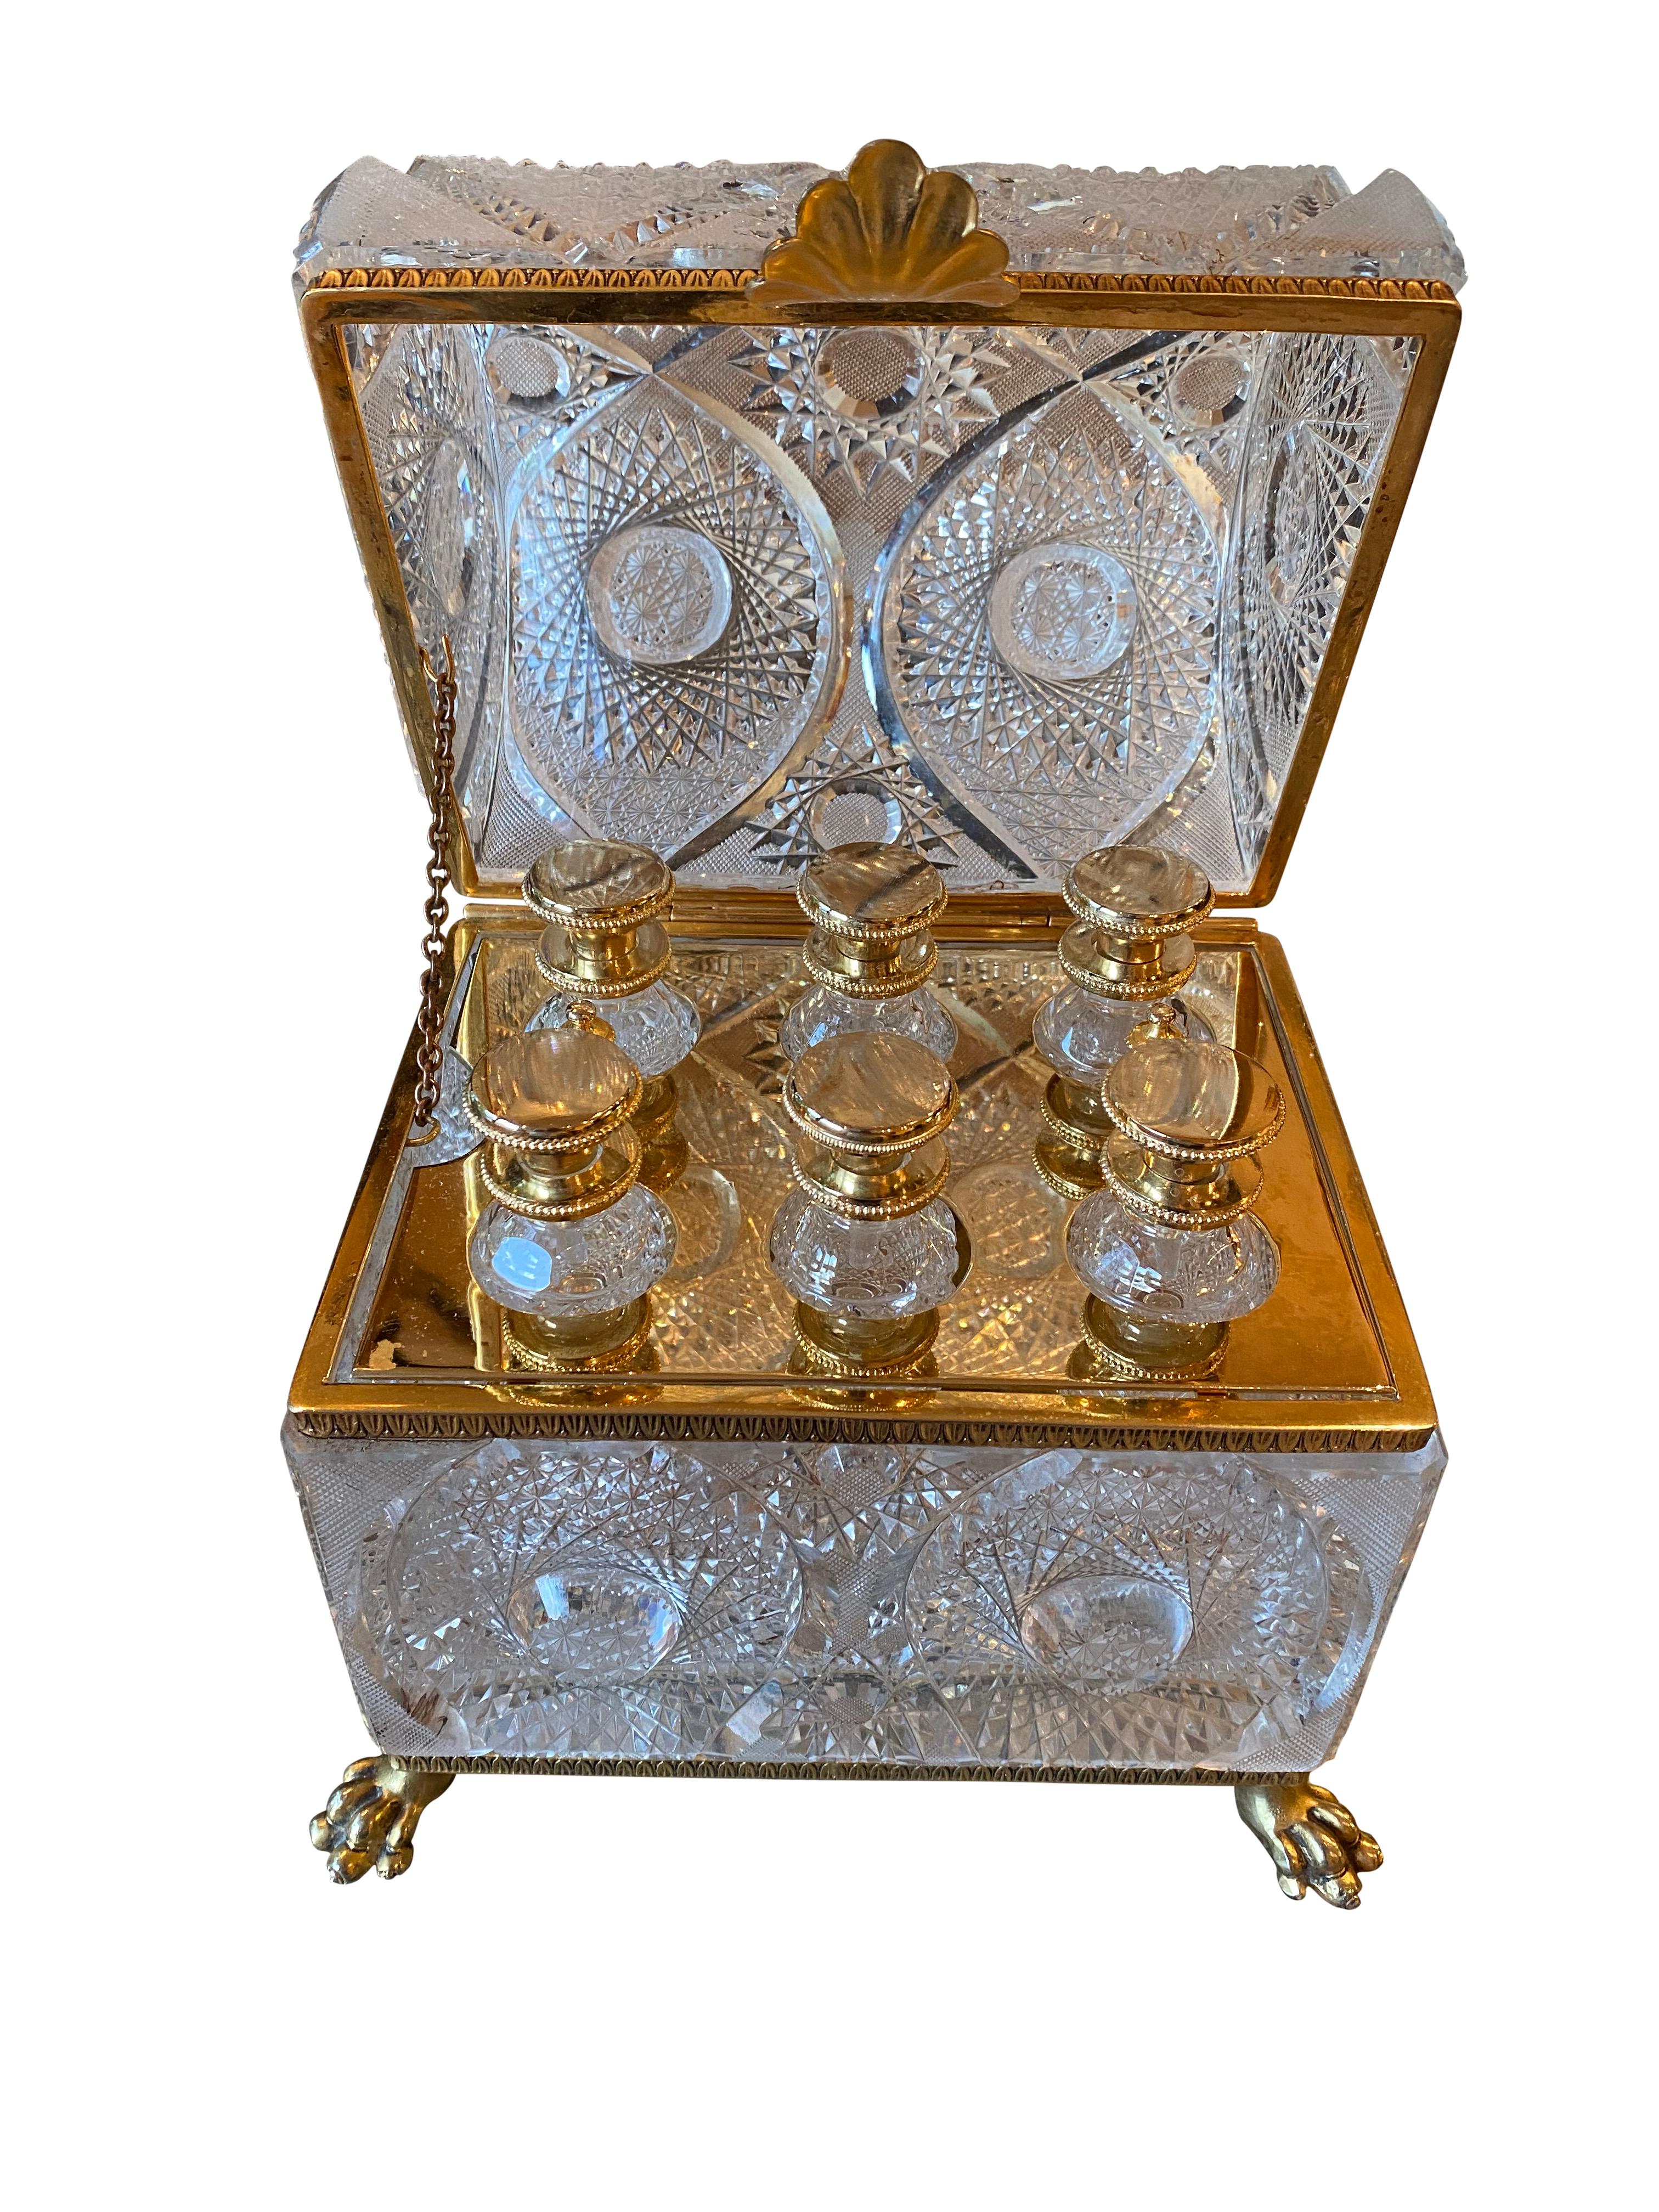 French Gilt Bronze Mounted Cut Glass Domed Casket Cristal Frères, Martin Benito 7